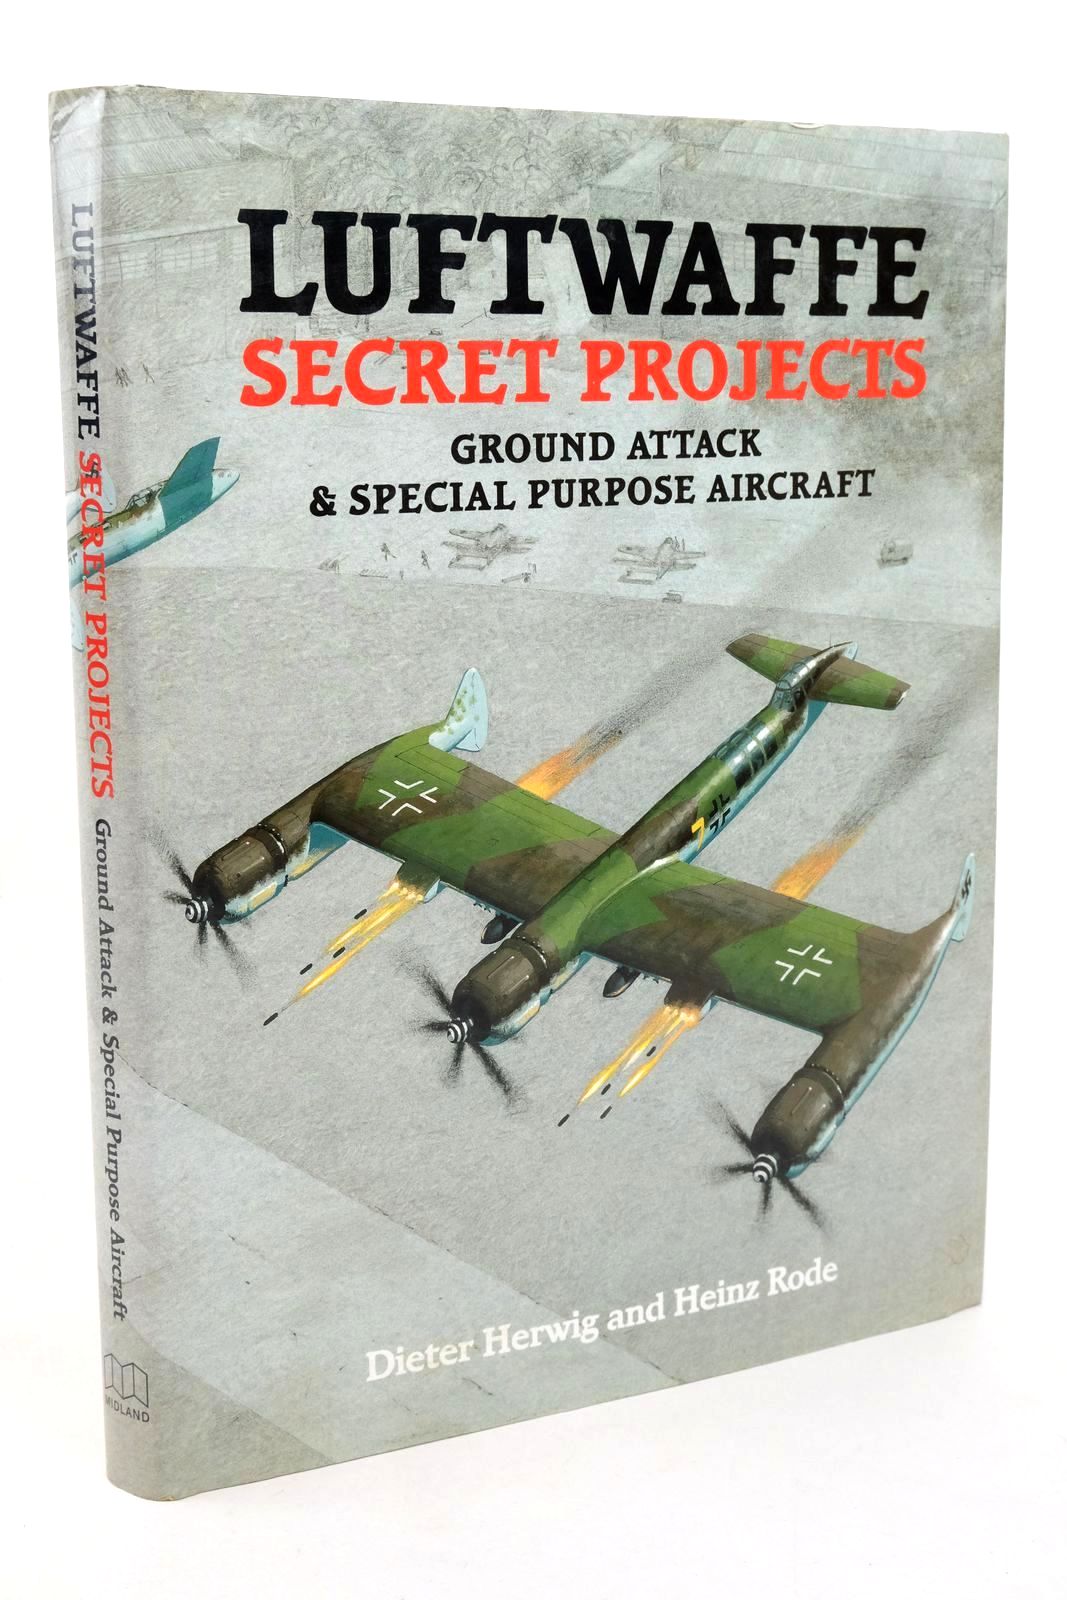 Photo of LUFTWAFFE SECRET PROJECTS GROUND ATTACK & SPECIAL PURPOSE AIRCRAFT written by Herwig, Dieter published by Midland Publishing (STOCK CODE: 1322802)  for sale by Stella & Rose's Books